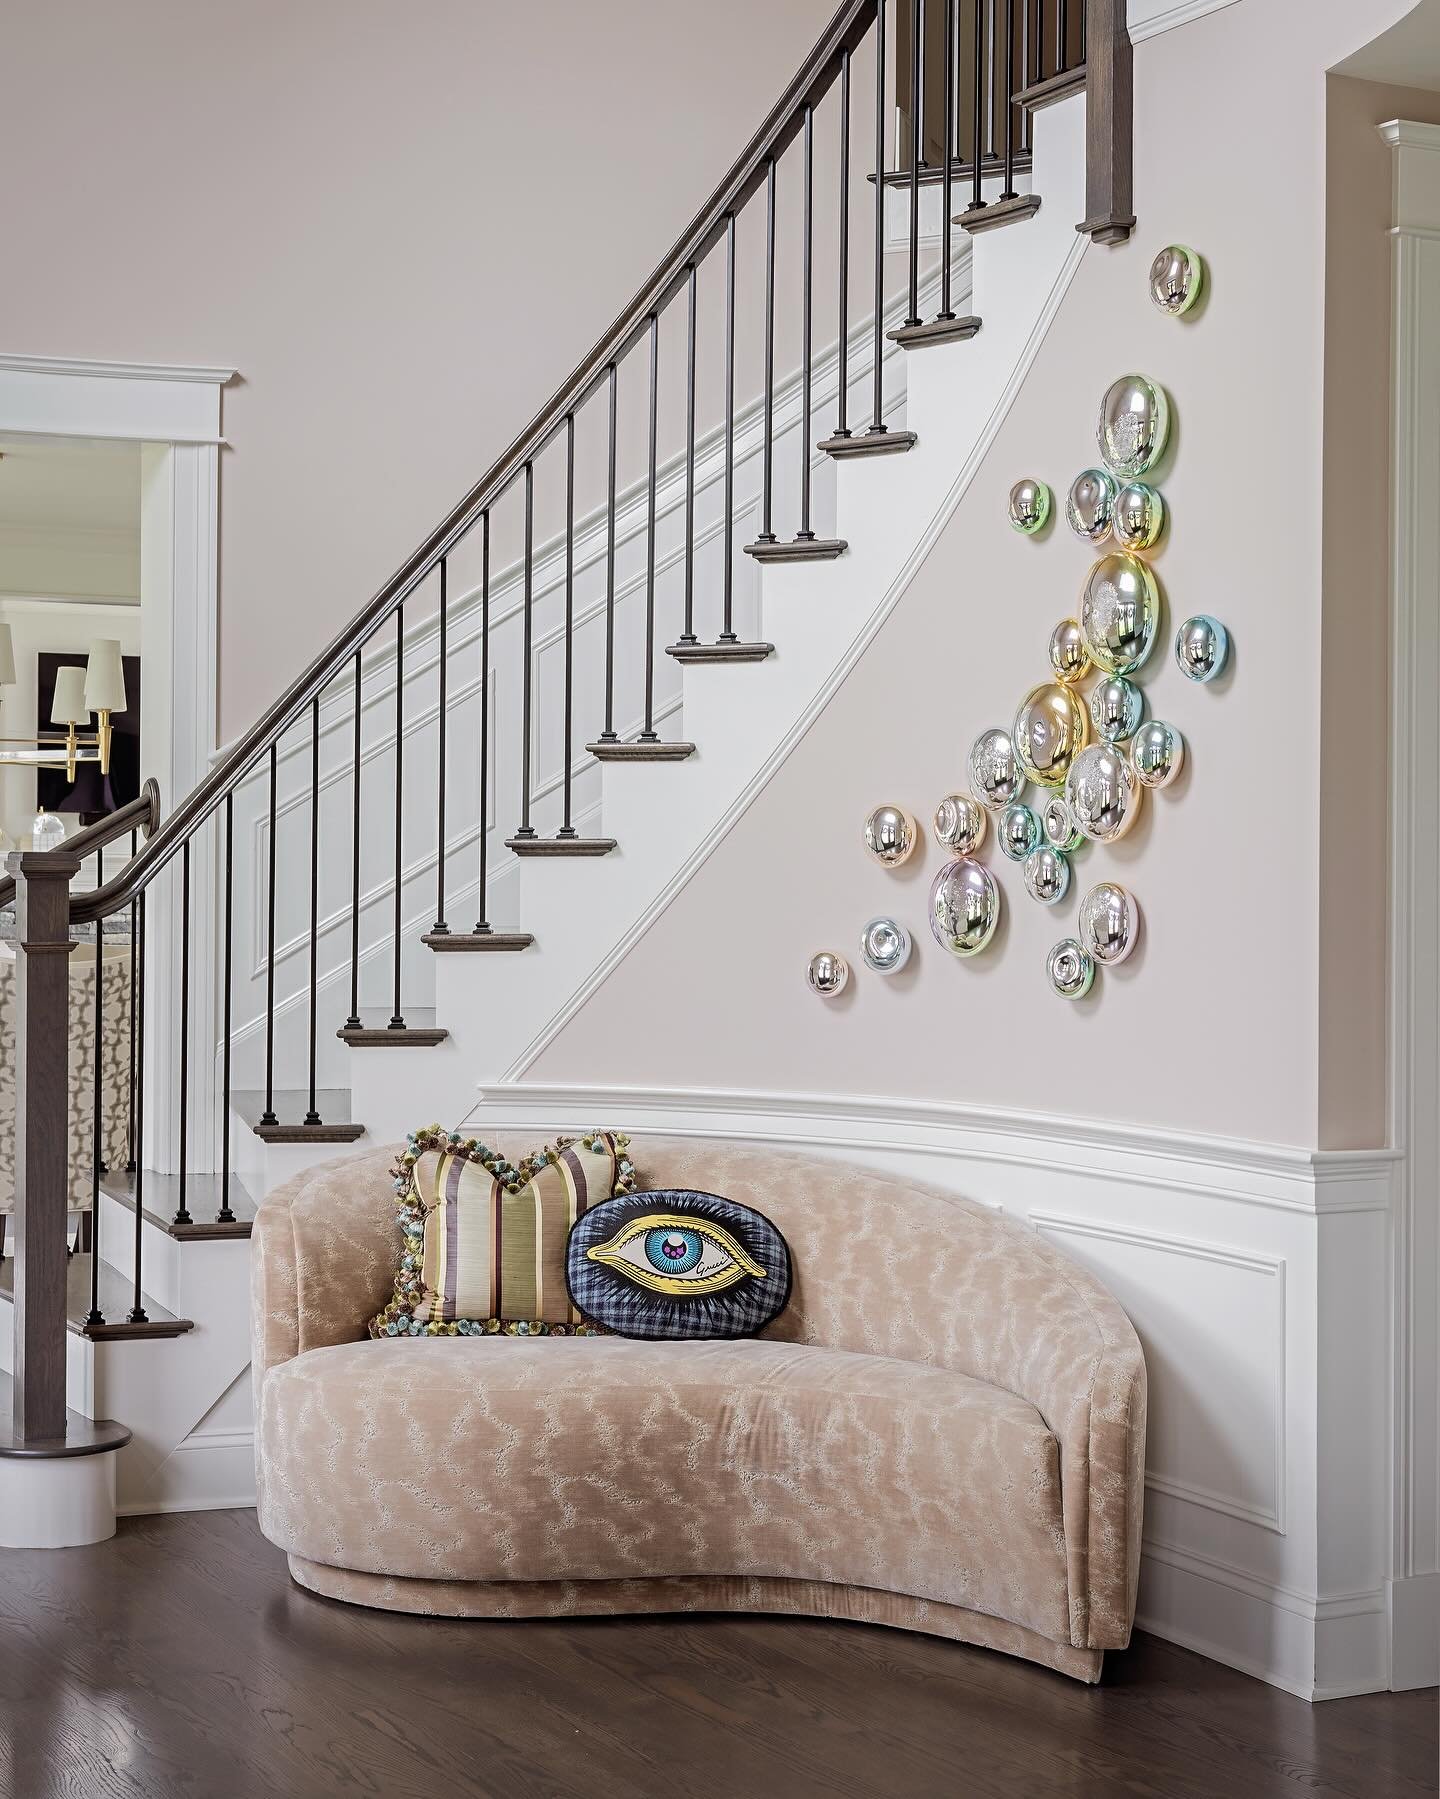 Have you ever wondered how the curved bannister is actually made? I loved witnessing the &ldquo;spine&rdquo;! This welcoming foyer was an eye opener 👁️ in many ways! Swipe to see the spine!
#vibrant #collected #intuitive
📸: @michaeljleephotography 